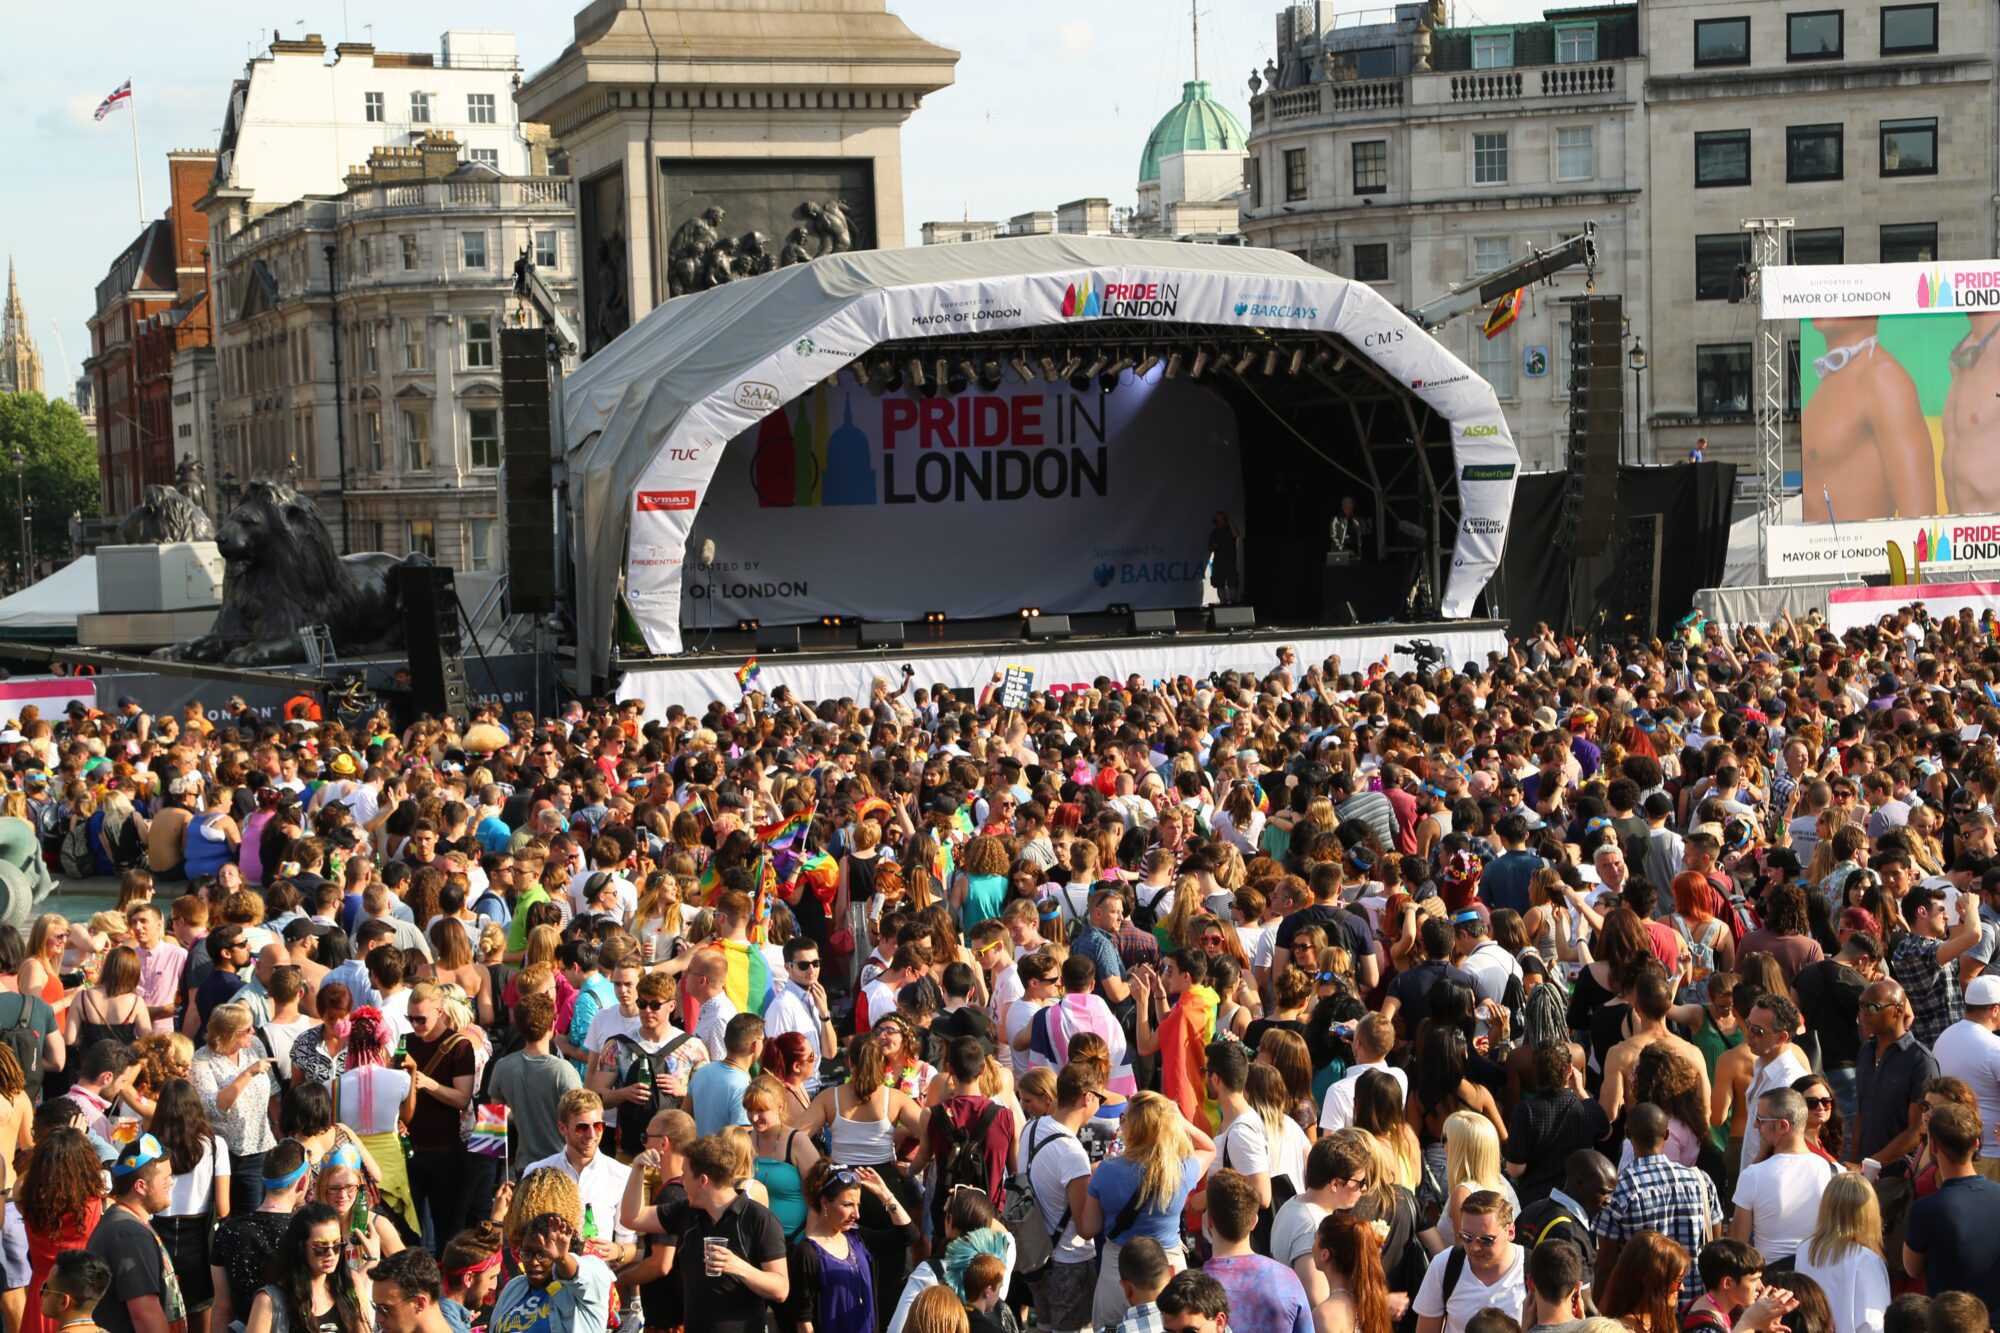 Mayor of London agrees to Fossil Free Pride campaign – South London News